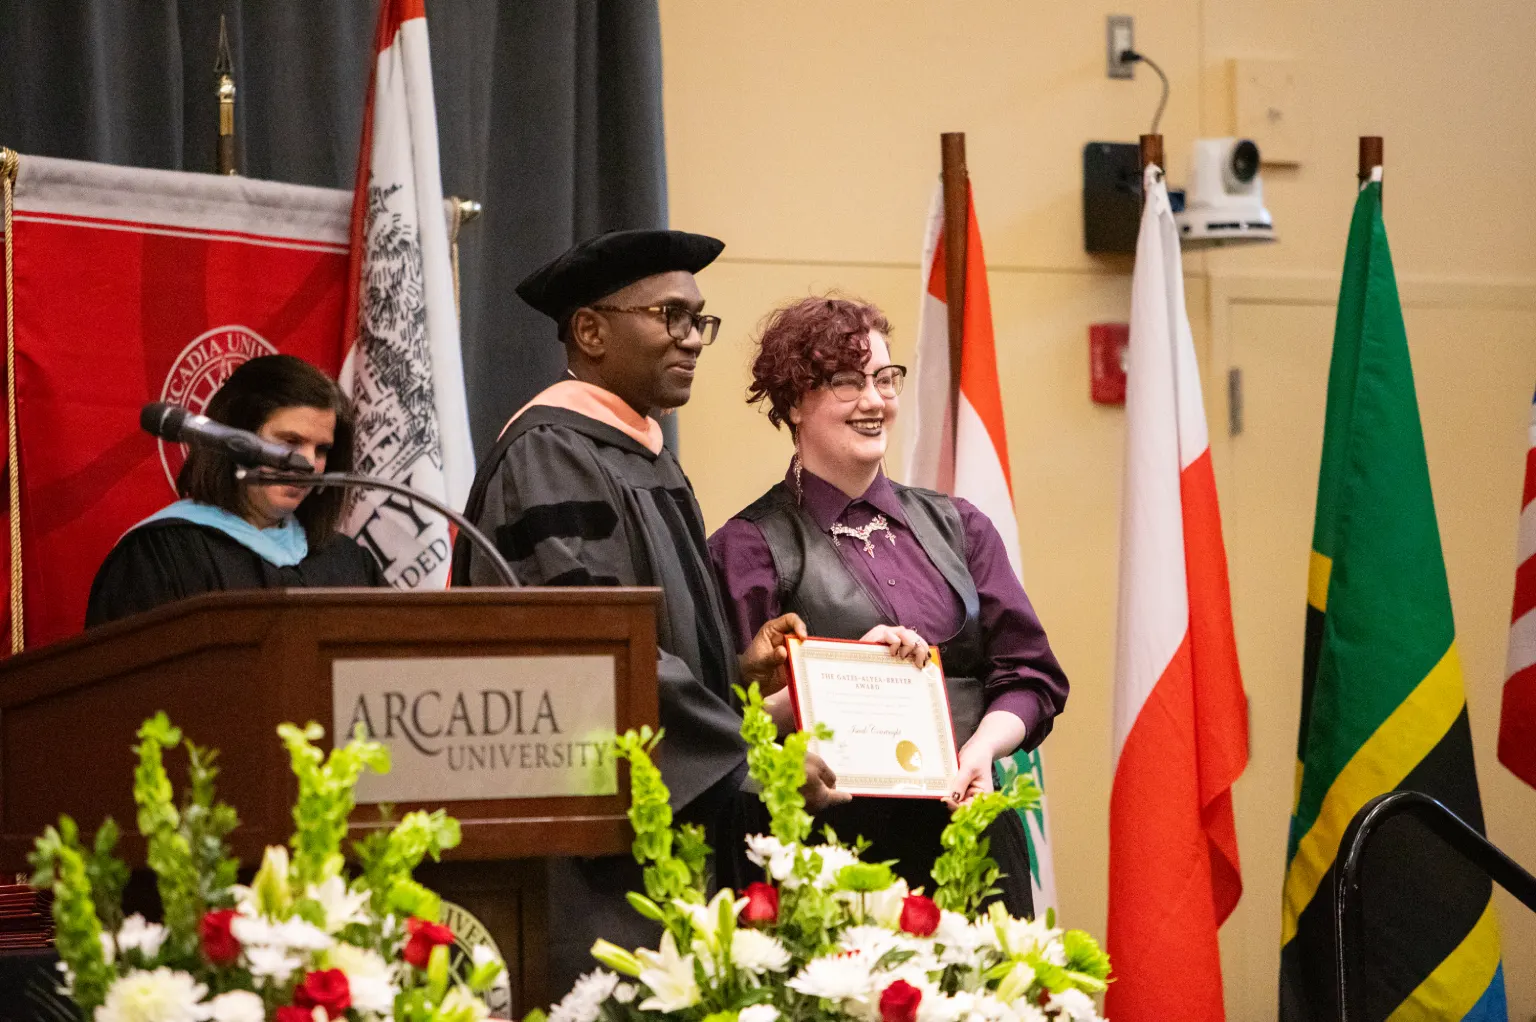 A student holding up their award with faculty member